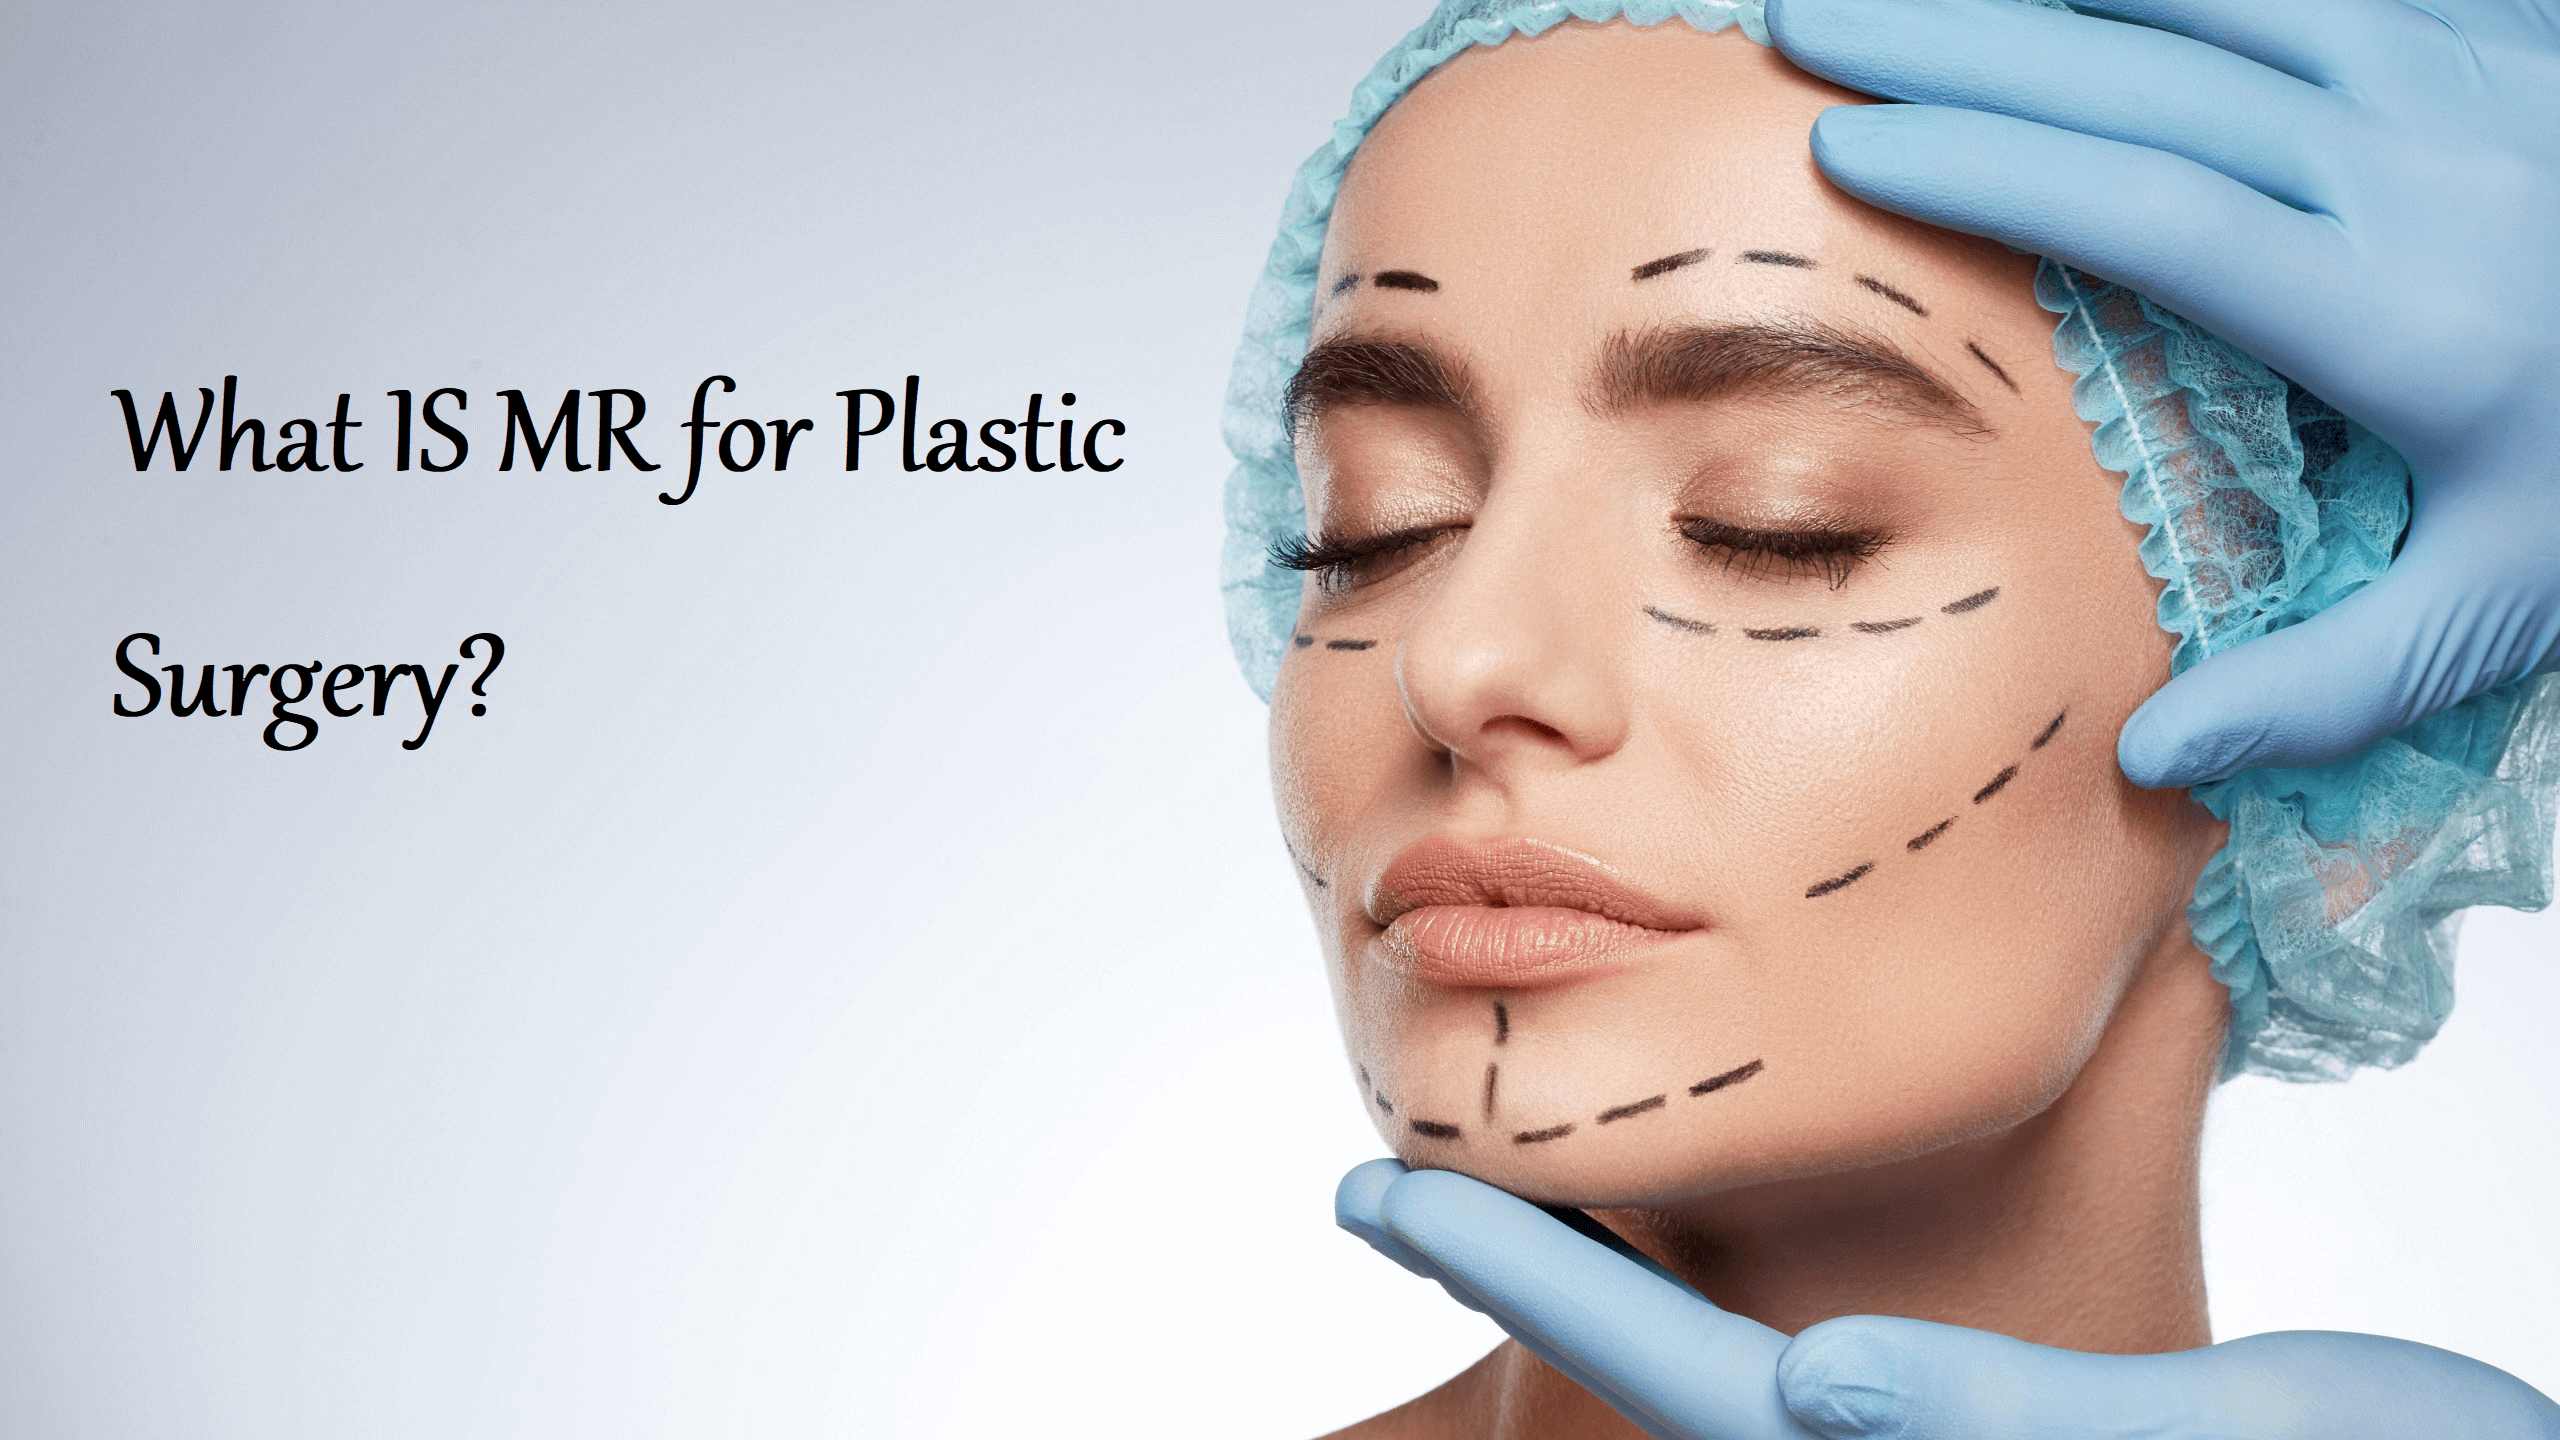 What IS MR for Plastic Surgery? – Learning Joan